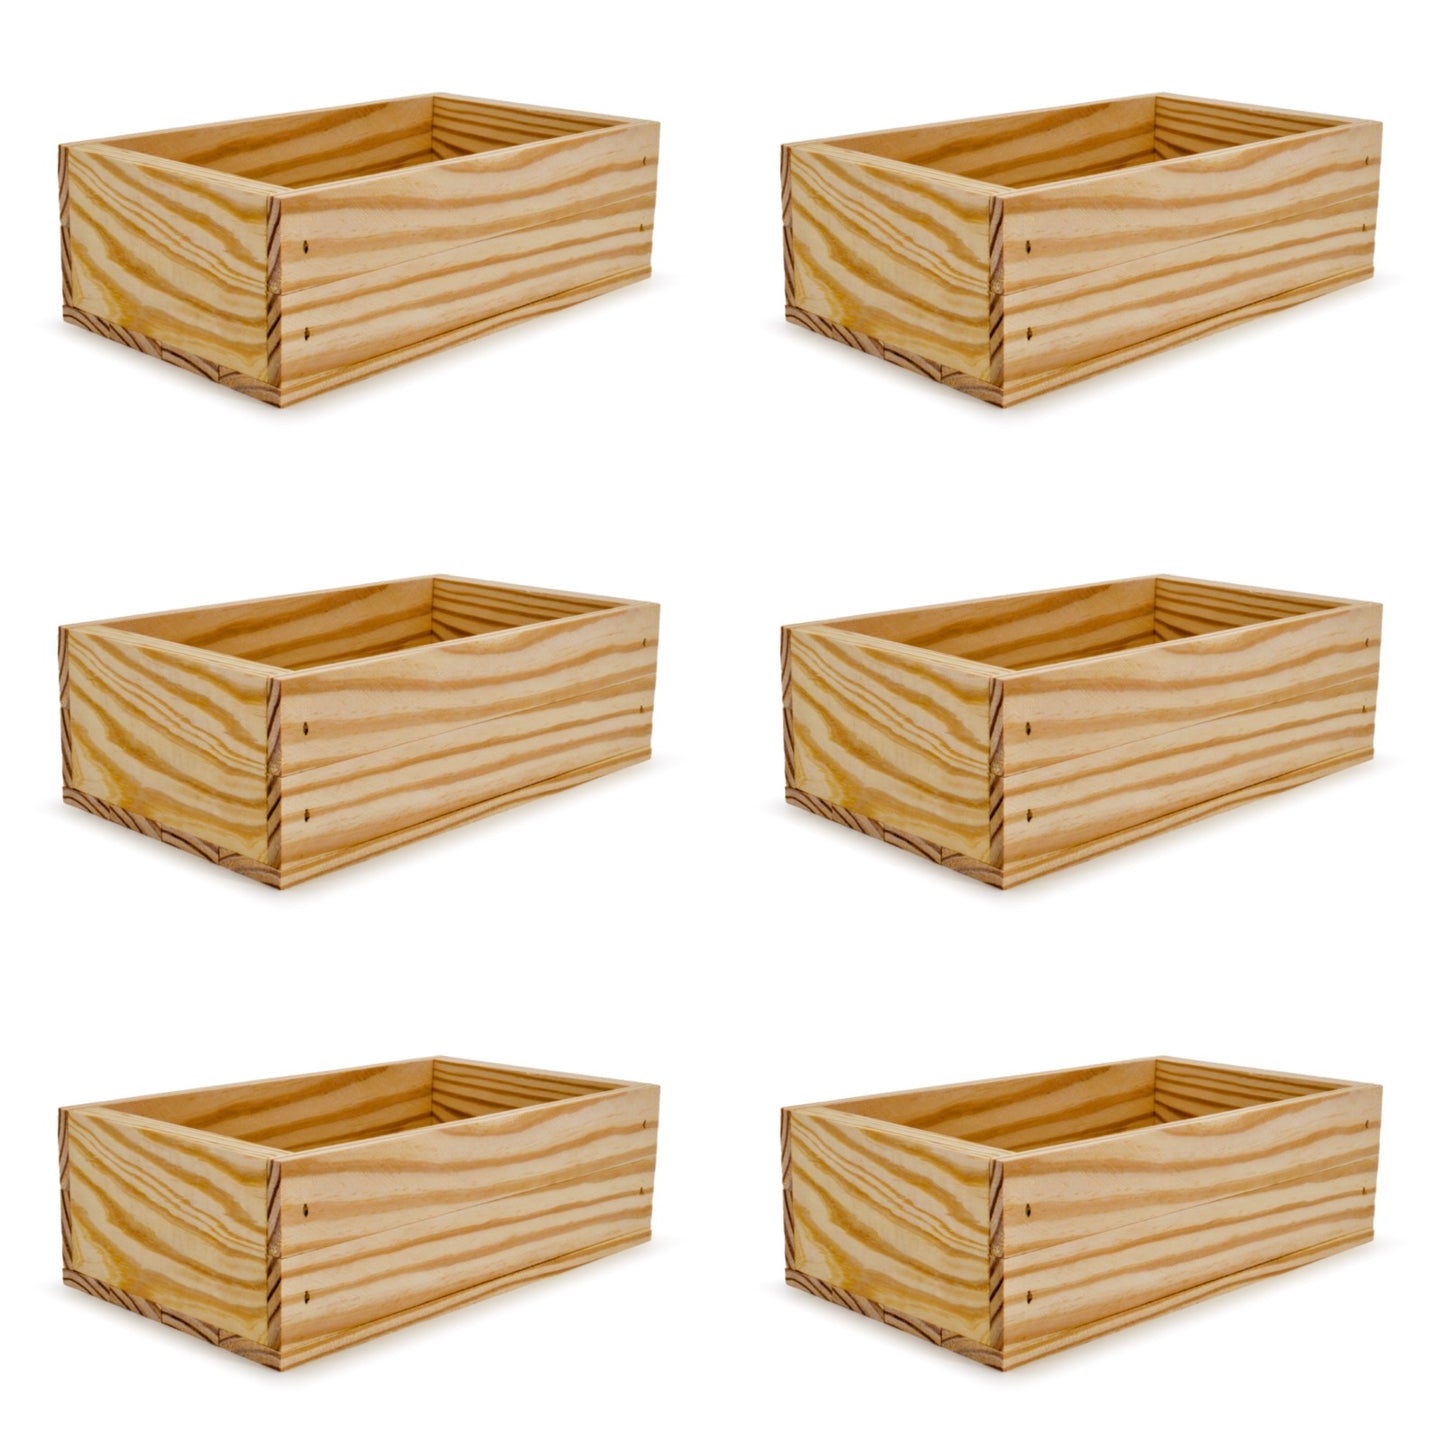 6 Small wooden crates 11x6.25x3.5